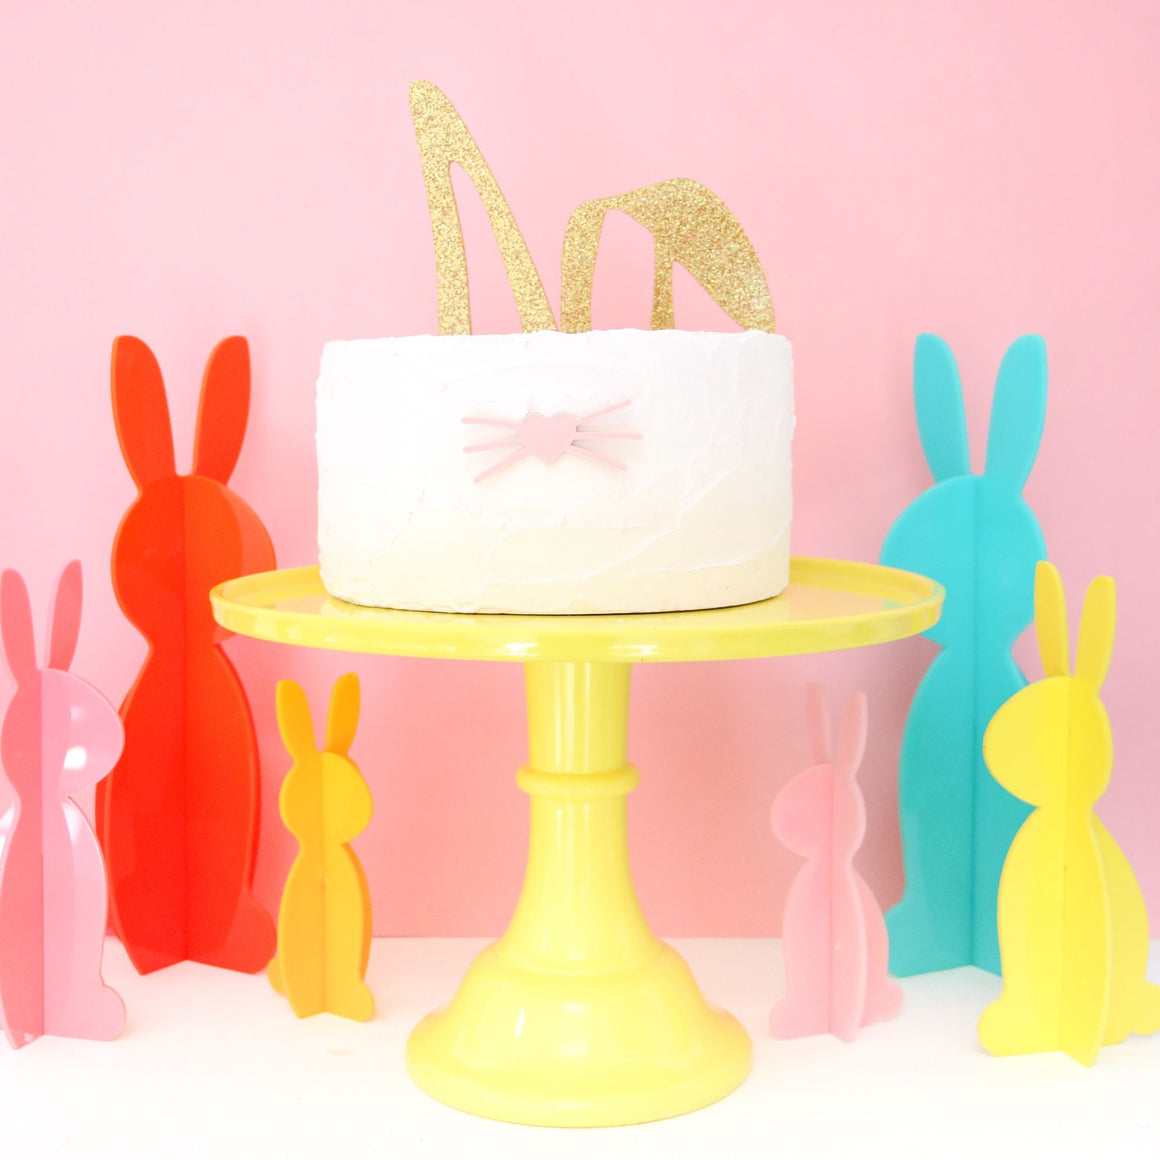 CAKE TOPPER - ACRYLIC GLITTER BUNNY EARS & PINK NOSE (2 piece)